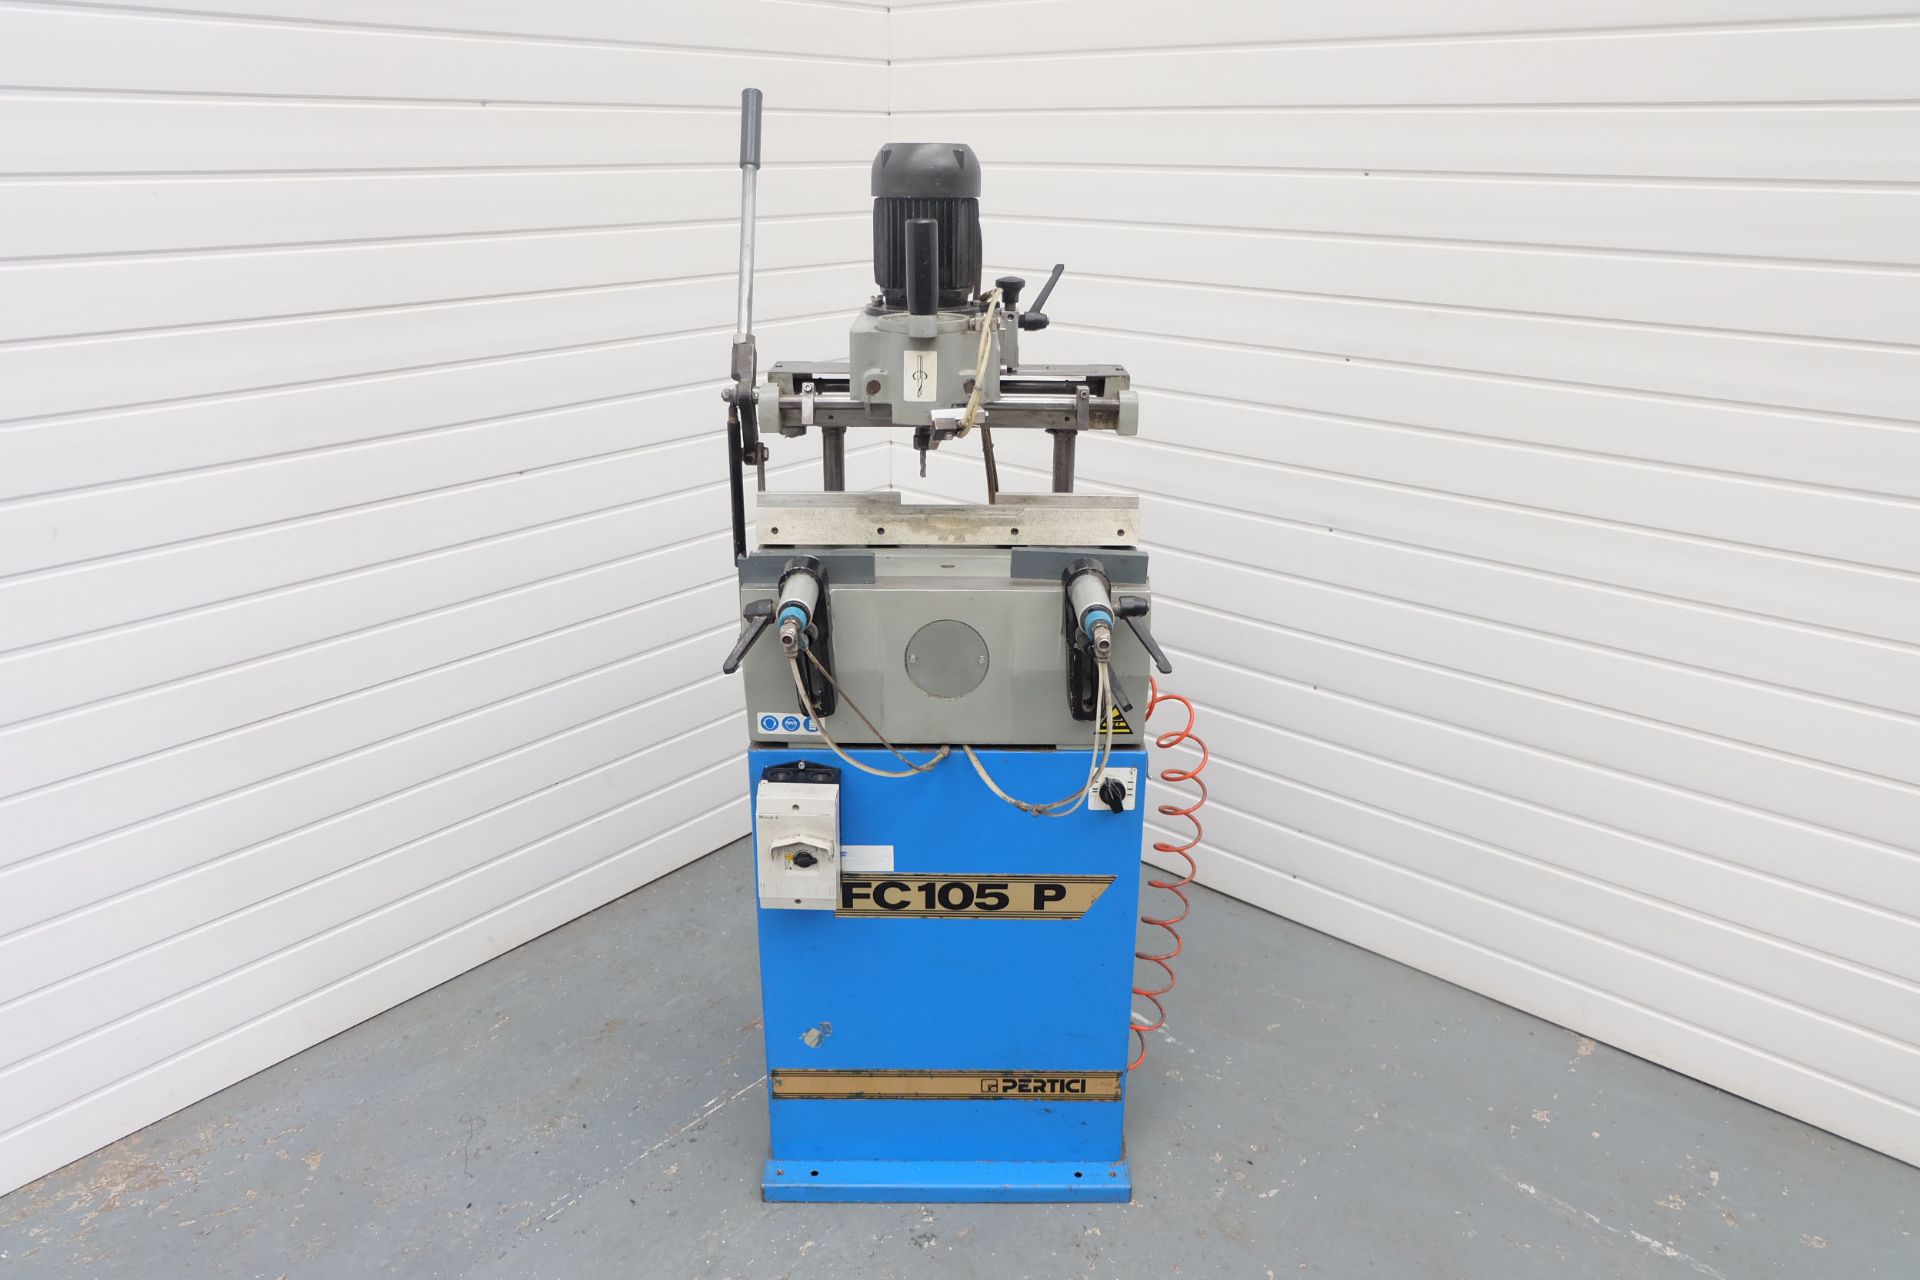 Pertici Type FC 105P. Single Spindle Copy Router.